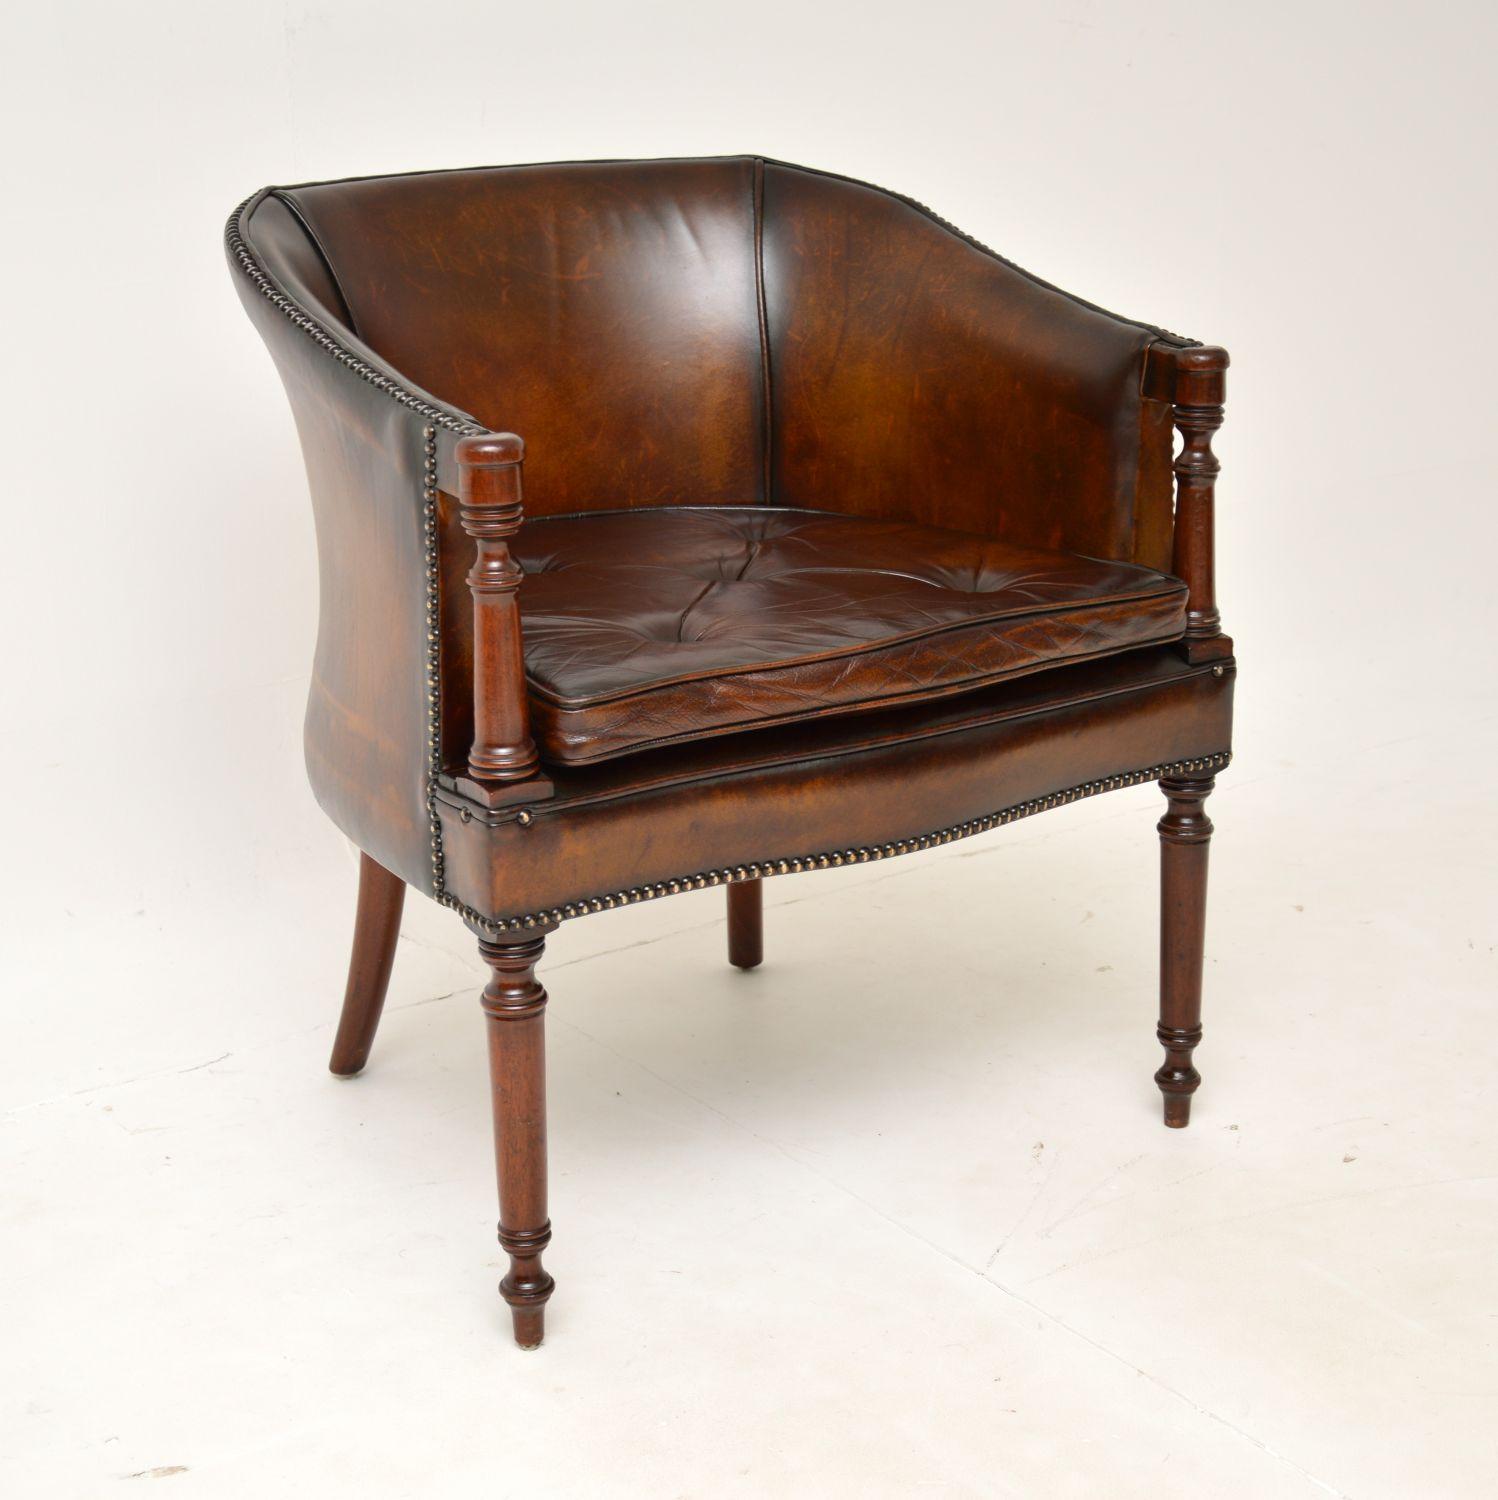 An excellent antique leather tub armchair in the Georgian style. This was made in England, it dates from around the 1950’s.

The quality is fantastic, this is a great size and is very comfortable. It is perfect for use as a desk chair or and